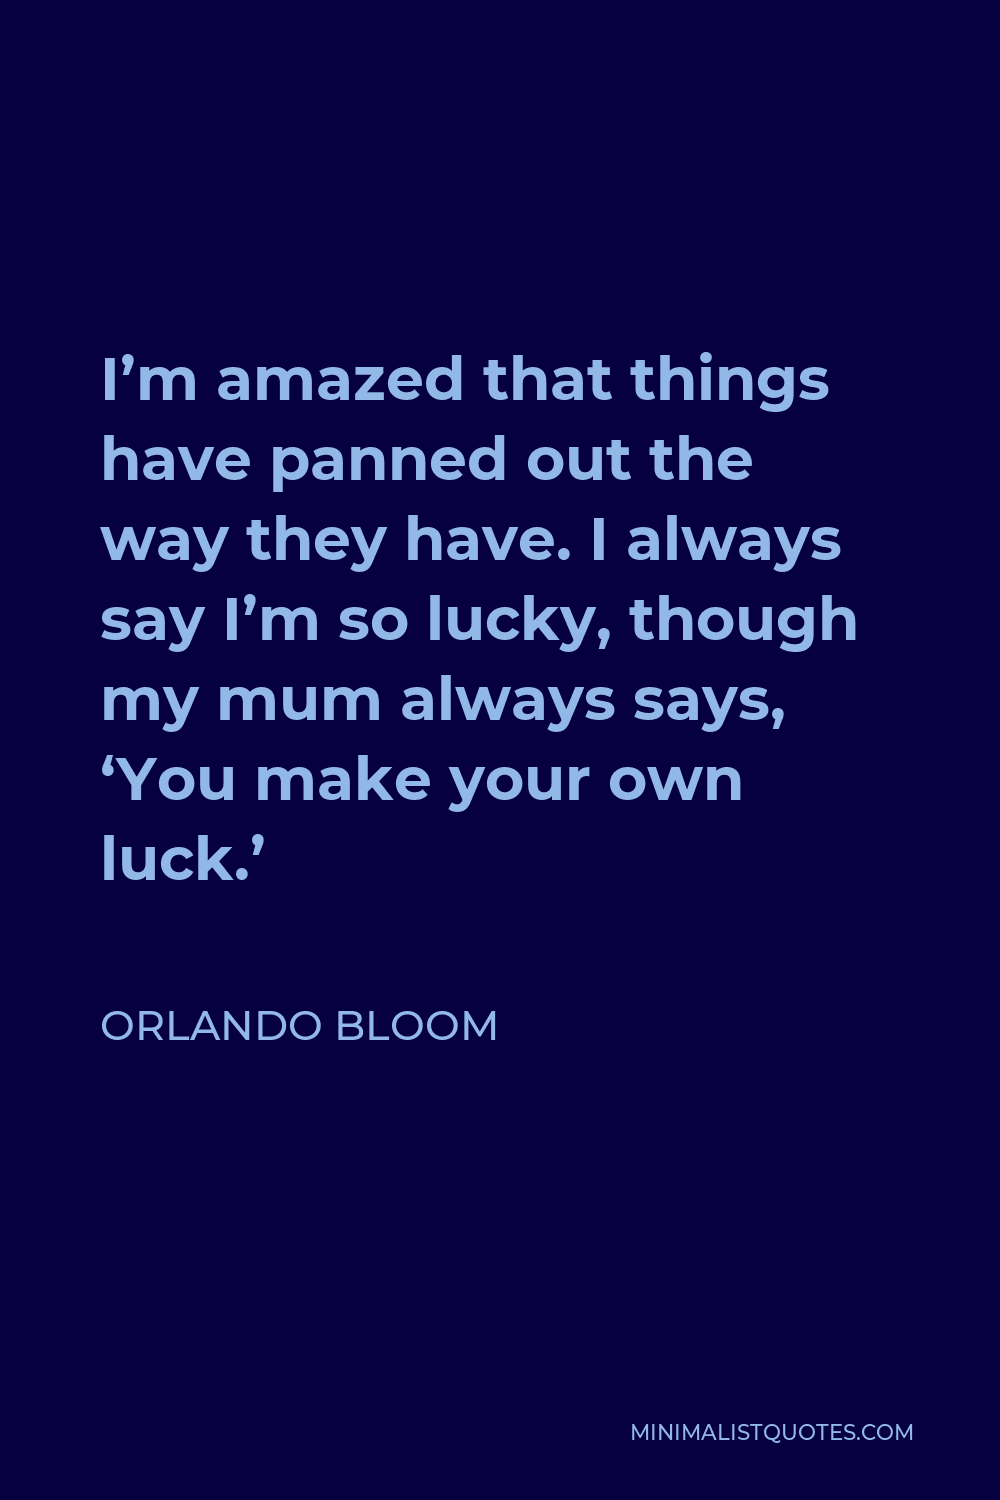 Orlando Bloom Quote - I’m amazed that things have panned out the way they have. I always say I’m so lucky, though my mum always says, ‘You make your own luck.’